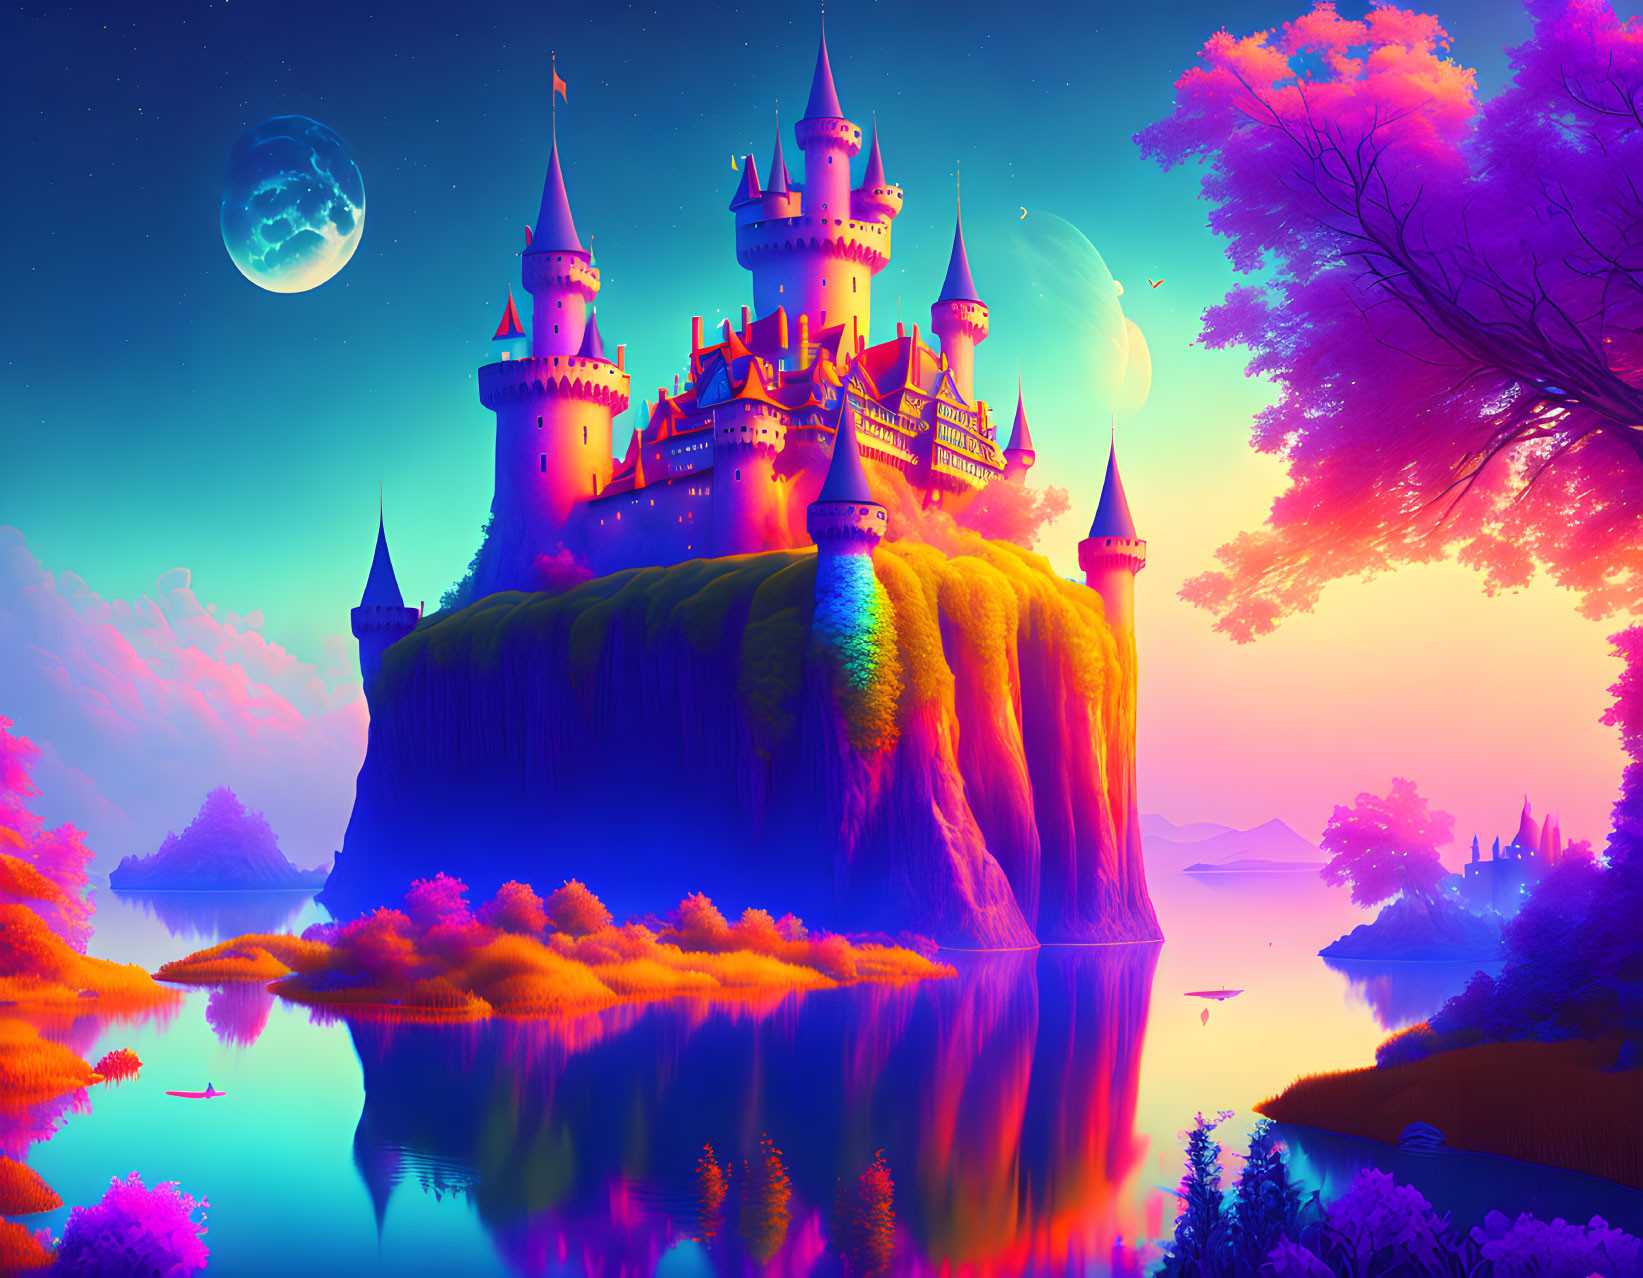 Majestic castle on cliff with neon flora under moonlit sky